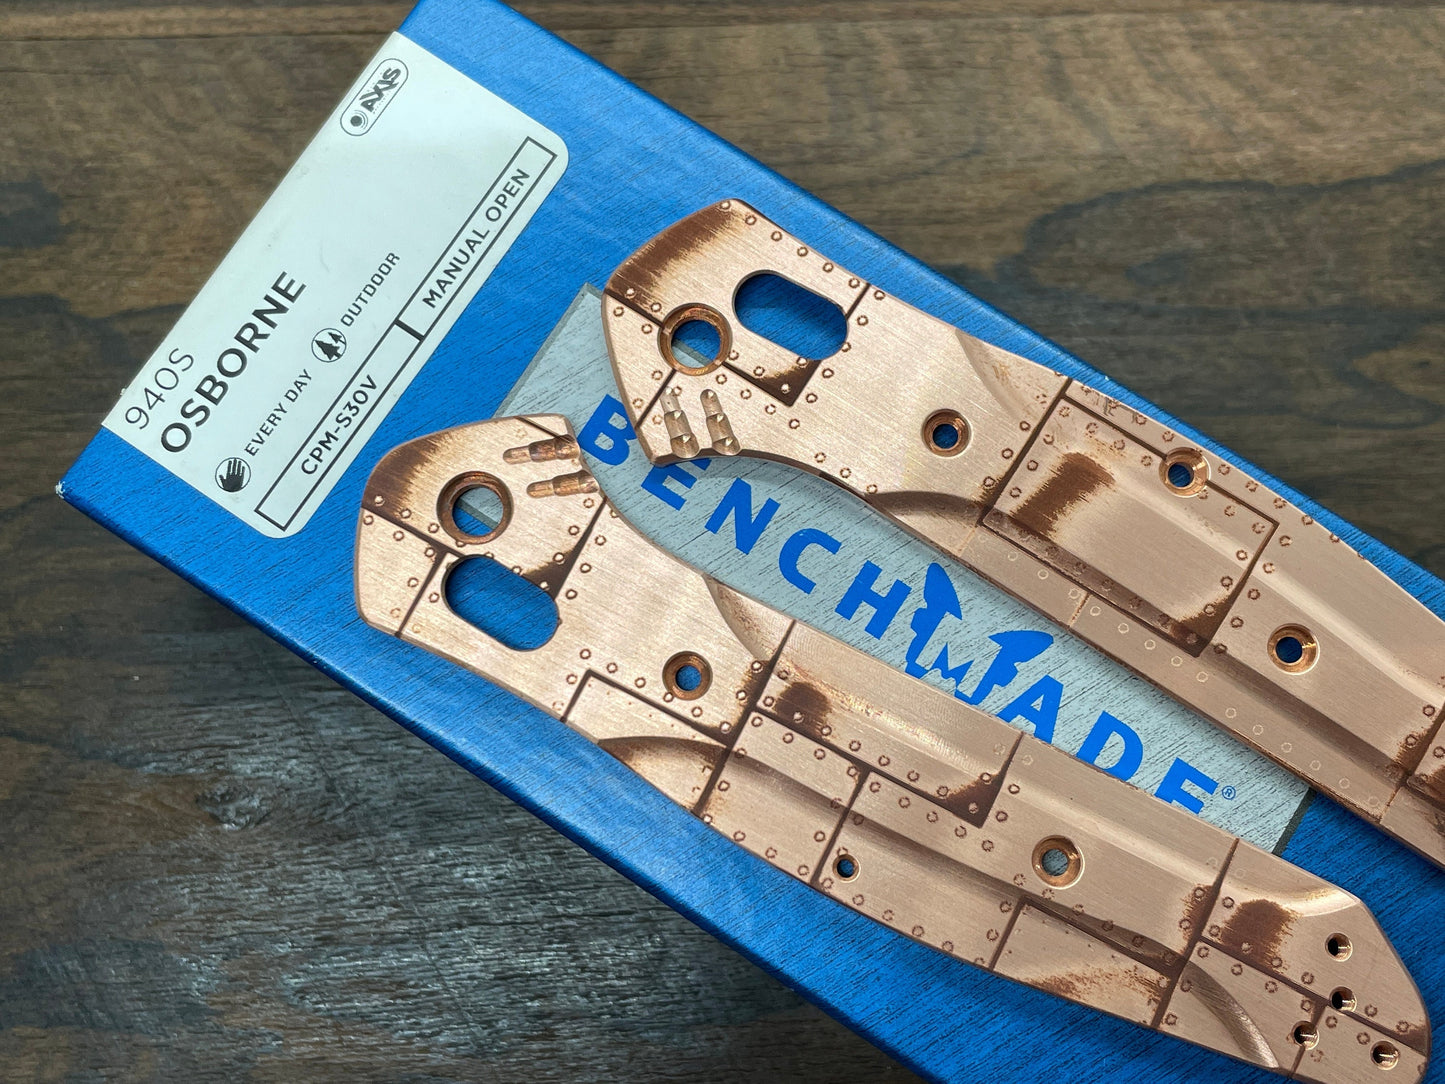 RIVETED AIRPLANE Copper Scales for Benchmade 940 Osborne